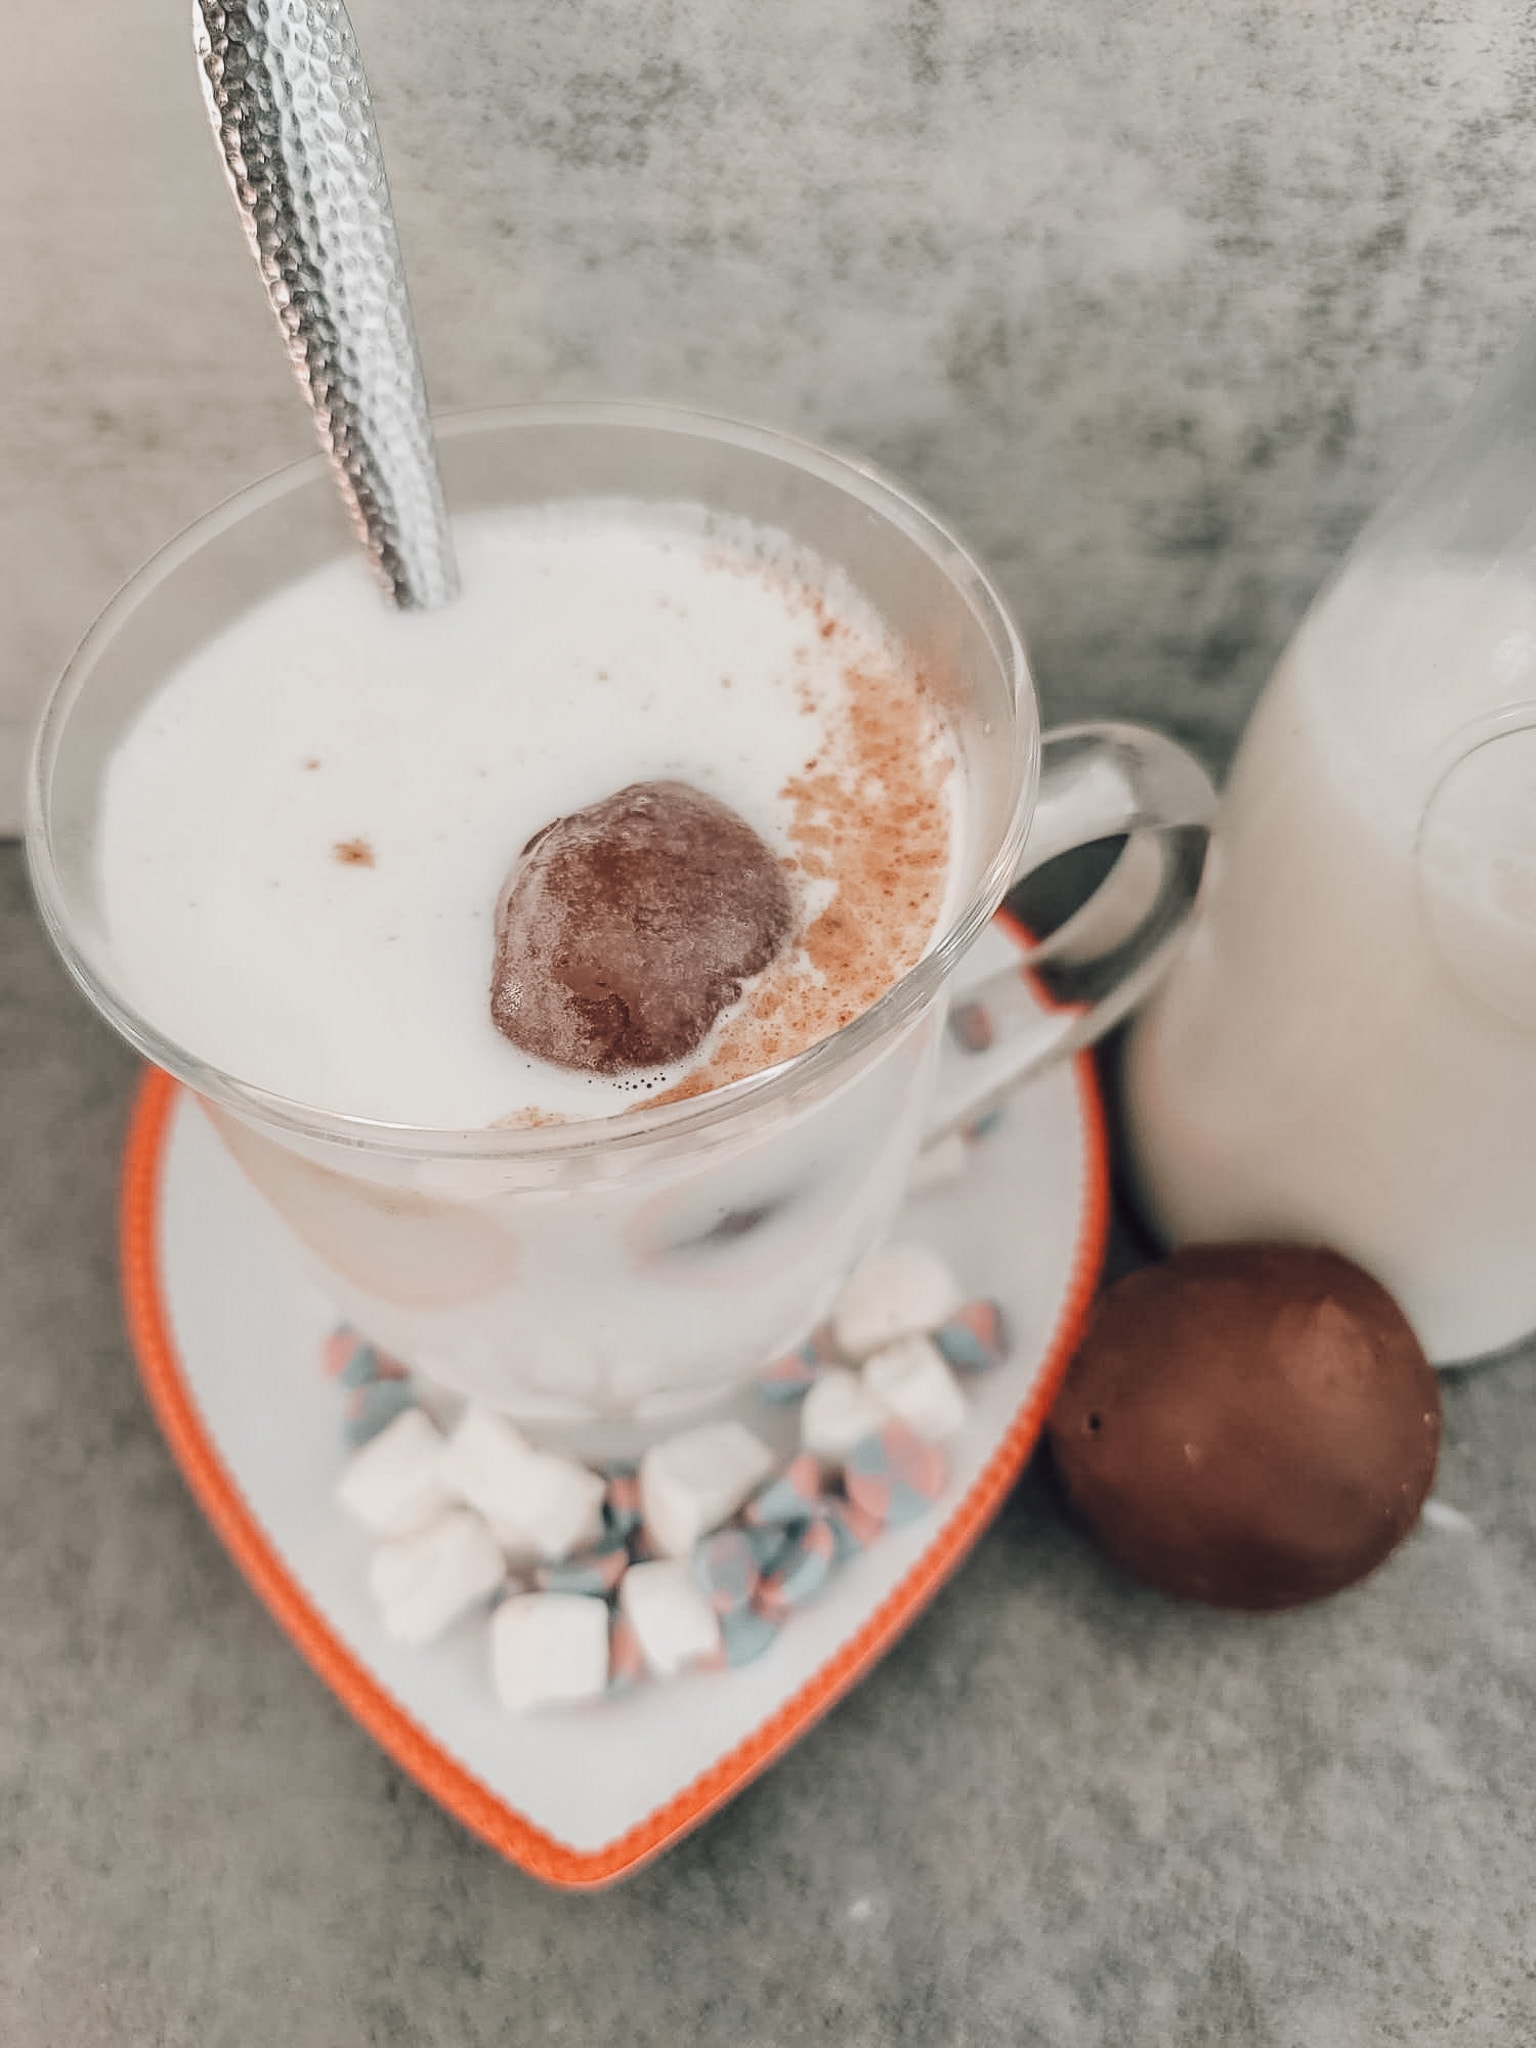 Attach the melted side to the non-melted side and seal with your fingertip.  Warm the milk of your choice and plop a cocoa bomb into the heated milk. Tada! You have hot chocolate! . Hot cocoa bomb recipe 